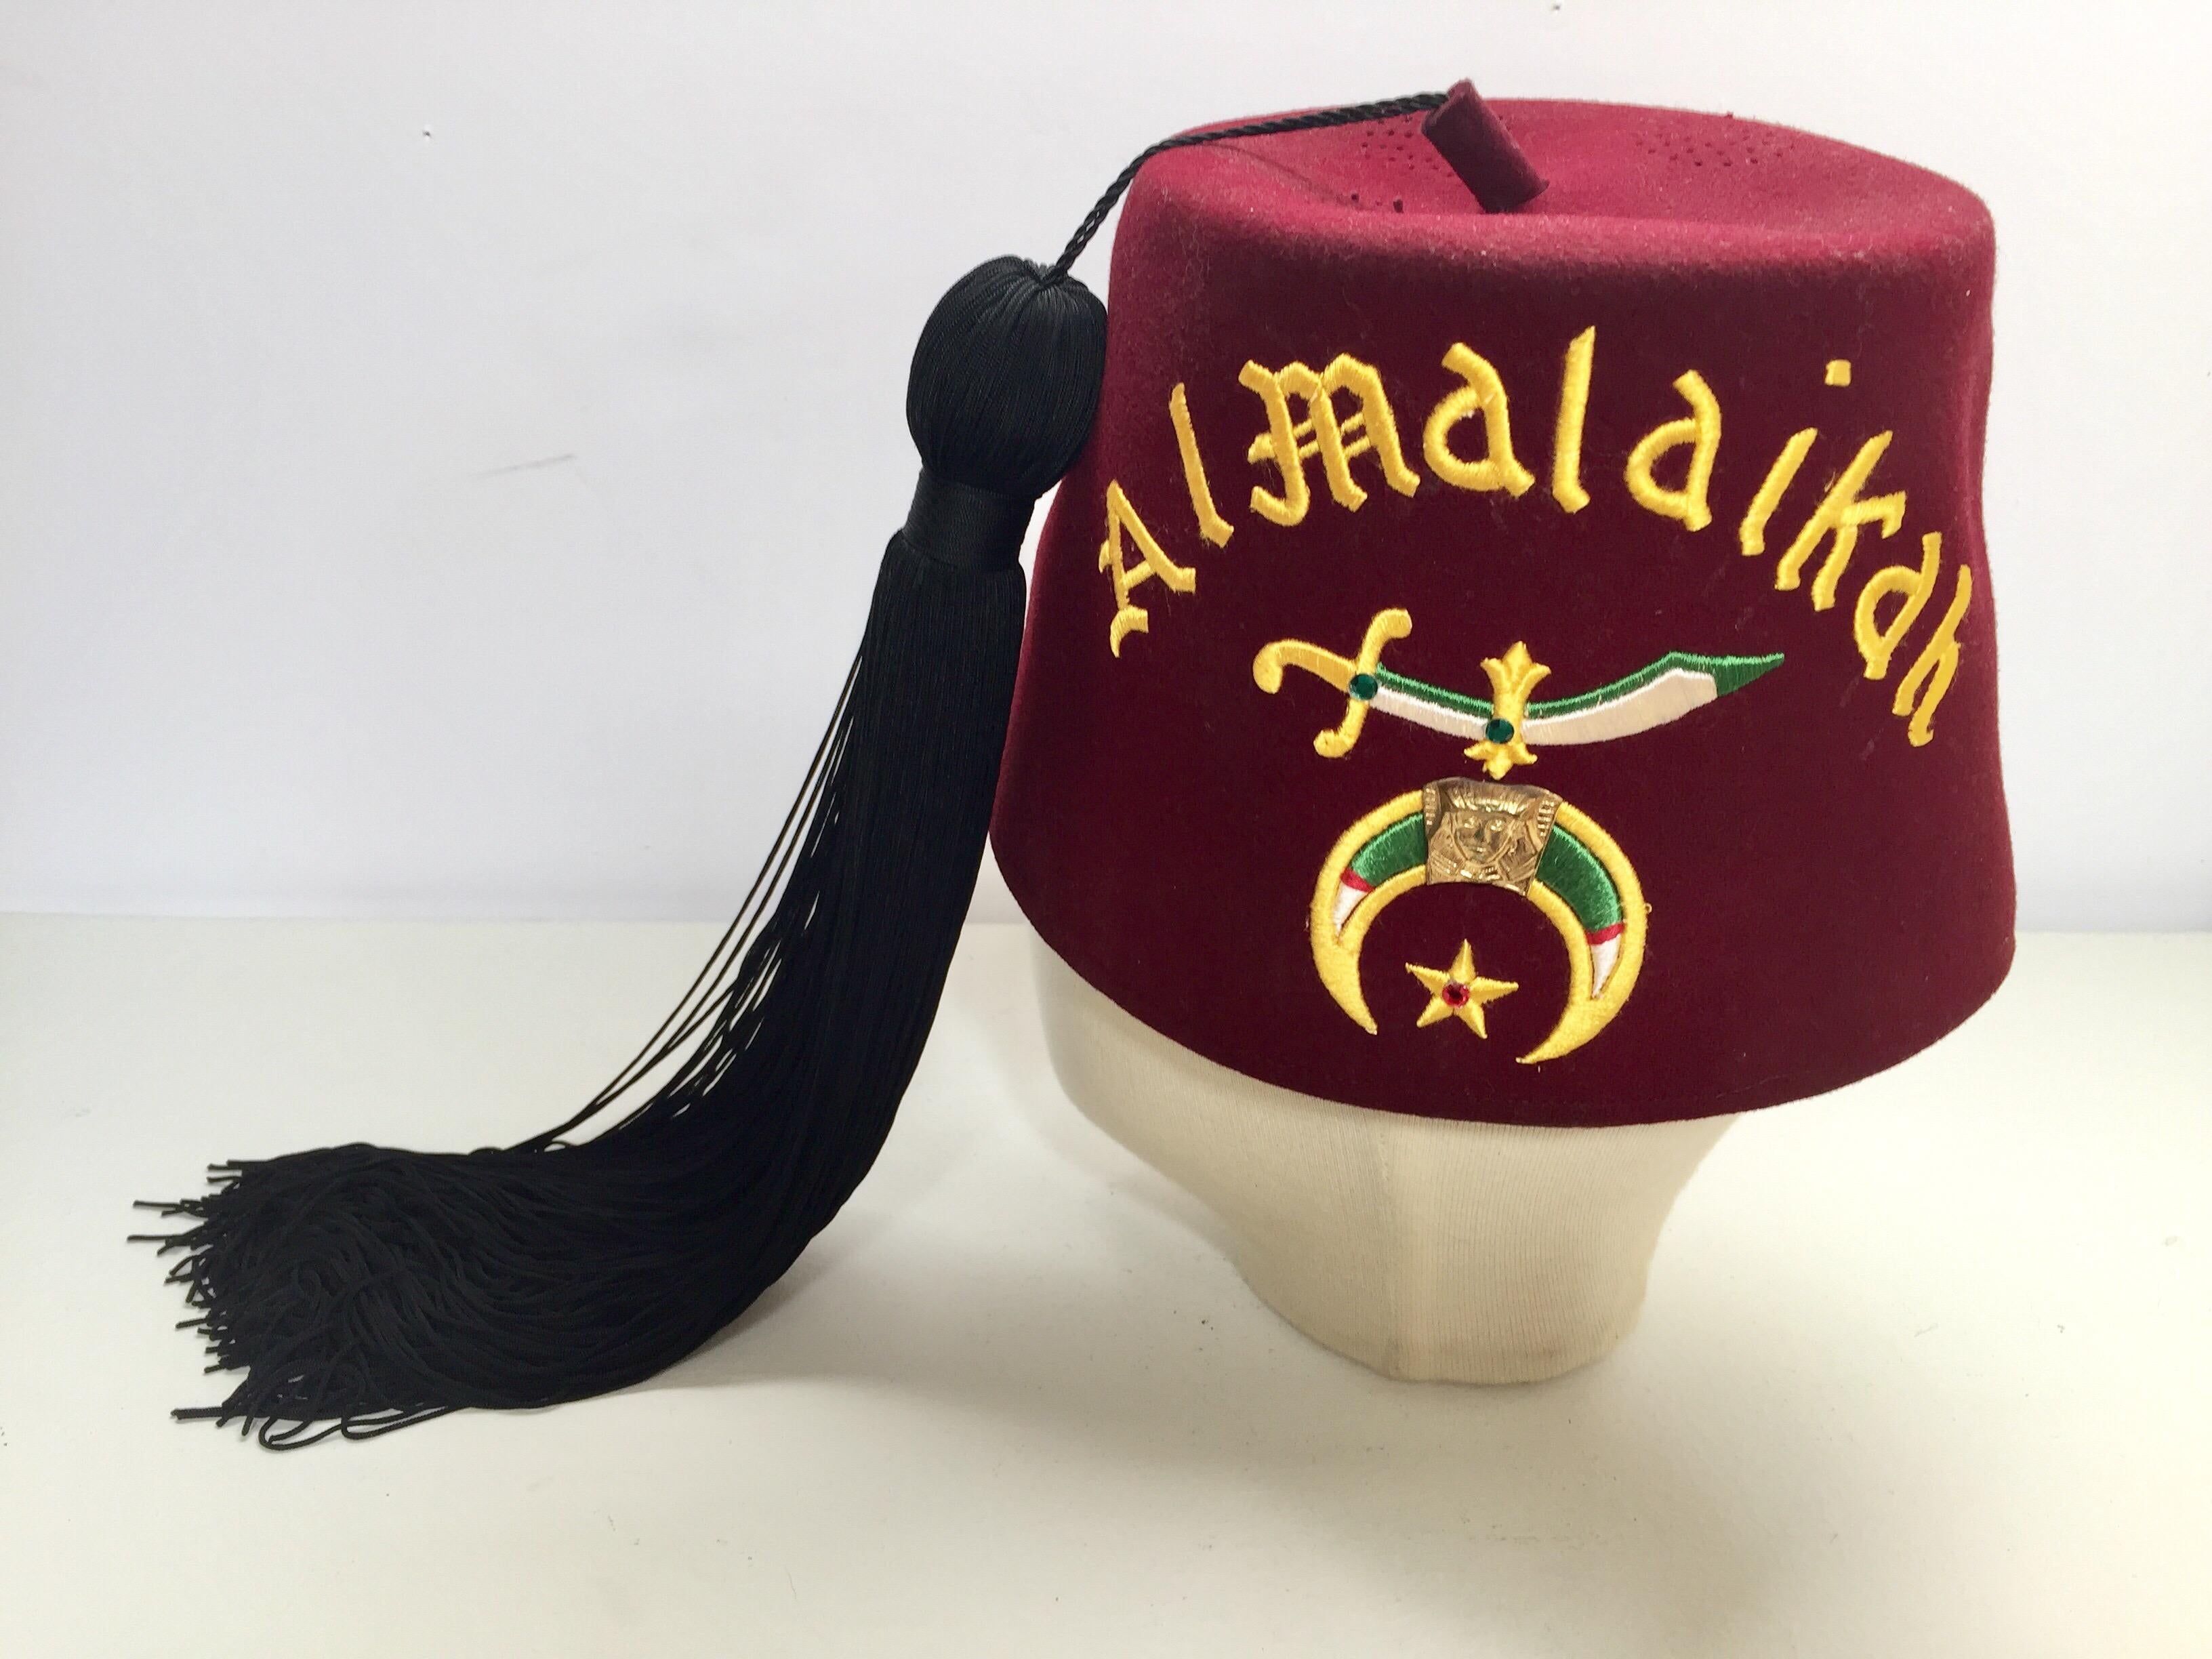 AL Malaikah Vintage Iconic Masonic Shriner Burgundy Wool Fez Hat In Good Condition For Sale In North Hollywood, CA